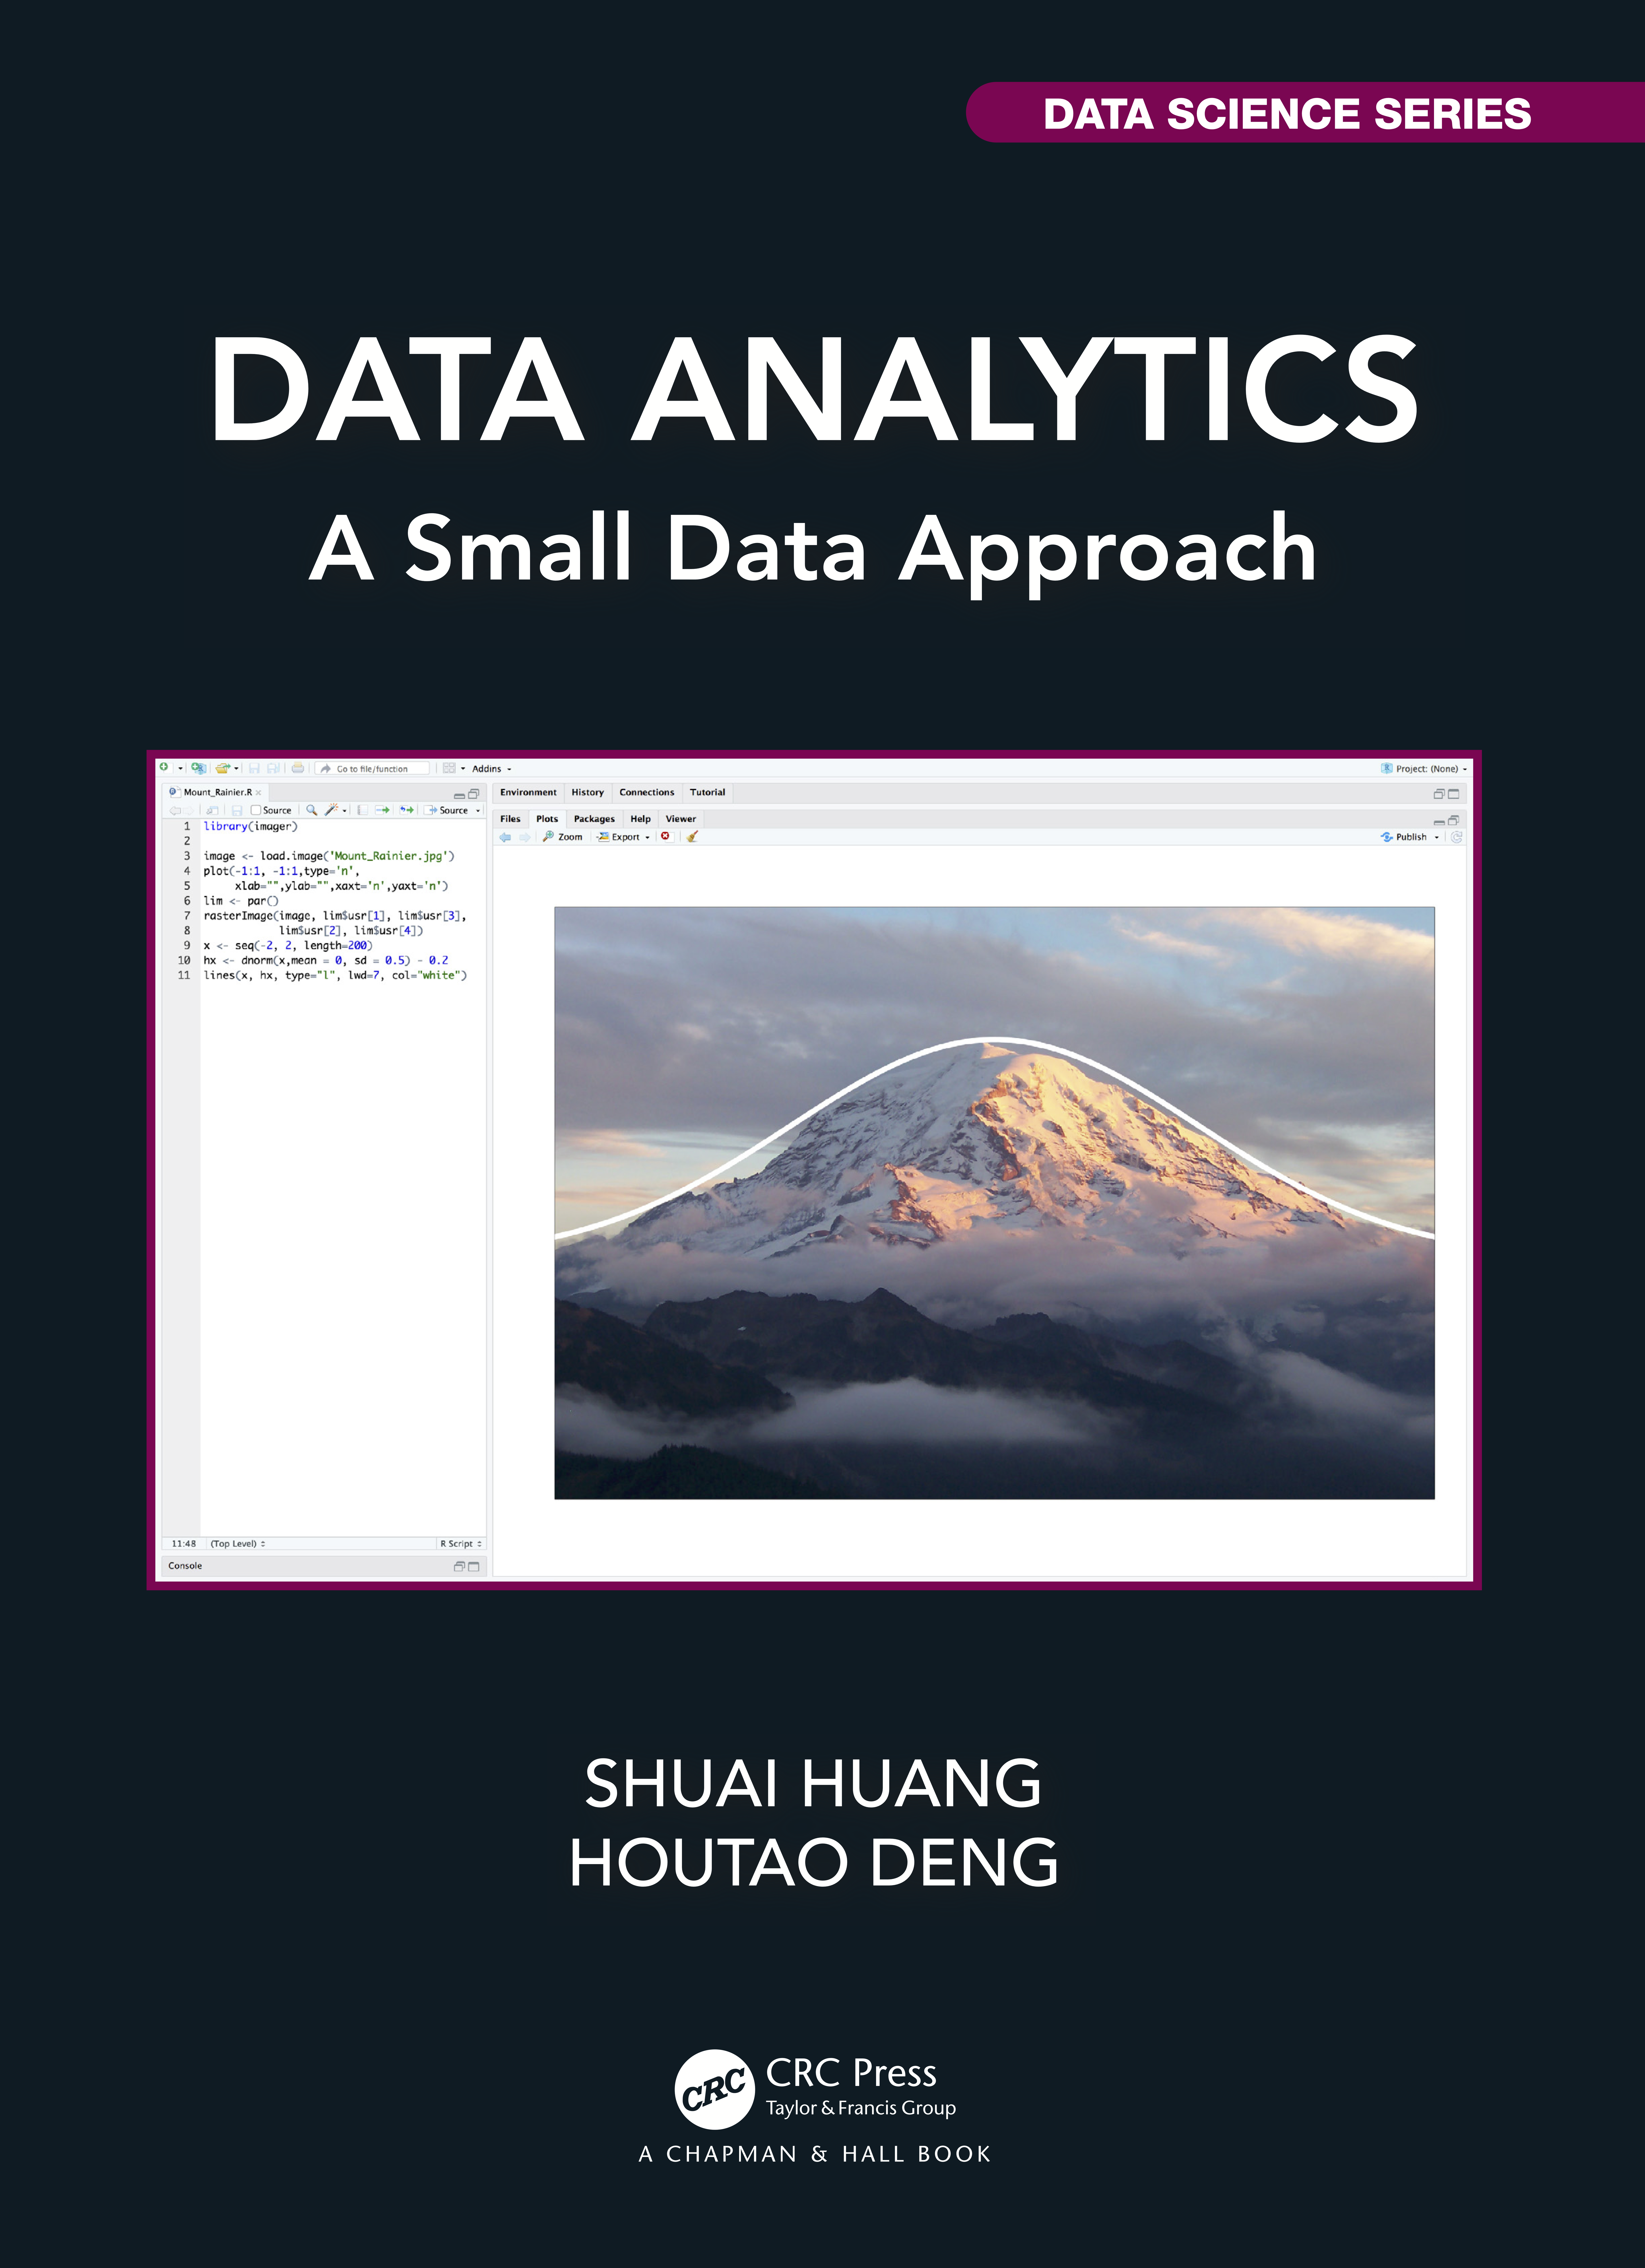  <br><br>    <span style="color: black;"> Shuai Huang and Houtao Deng. Data Analytics: A Small Data Approach. Chapman and Hall/CRC, 2021. </span> <br><br><br>       <span style="color: blue;">[Code and Data](https://github.com/analyticsbook/book)</span> <br><br>   <span style="color: blue;">[Leave Feedback](https://www.amazon.com/Data-Analytics-Approach-Chapman-Science/dp/0367609509)</span> <br><br>  <span style="color: blue;">[Contact Us](mailto:hello@dataanalyticsbook.info)</span> <br> 